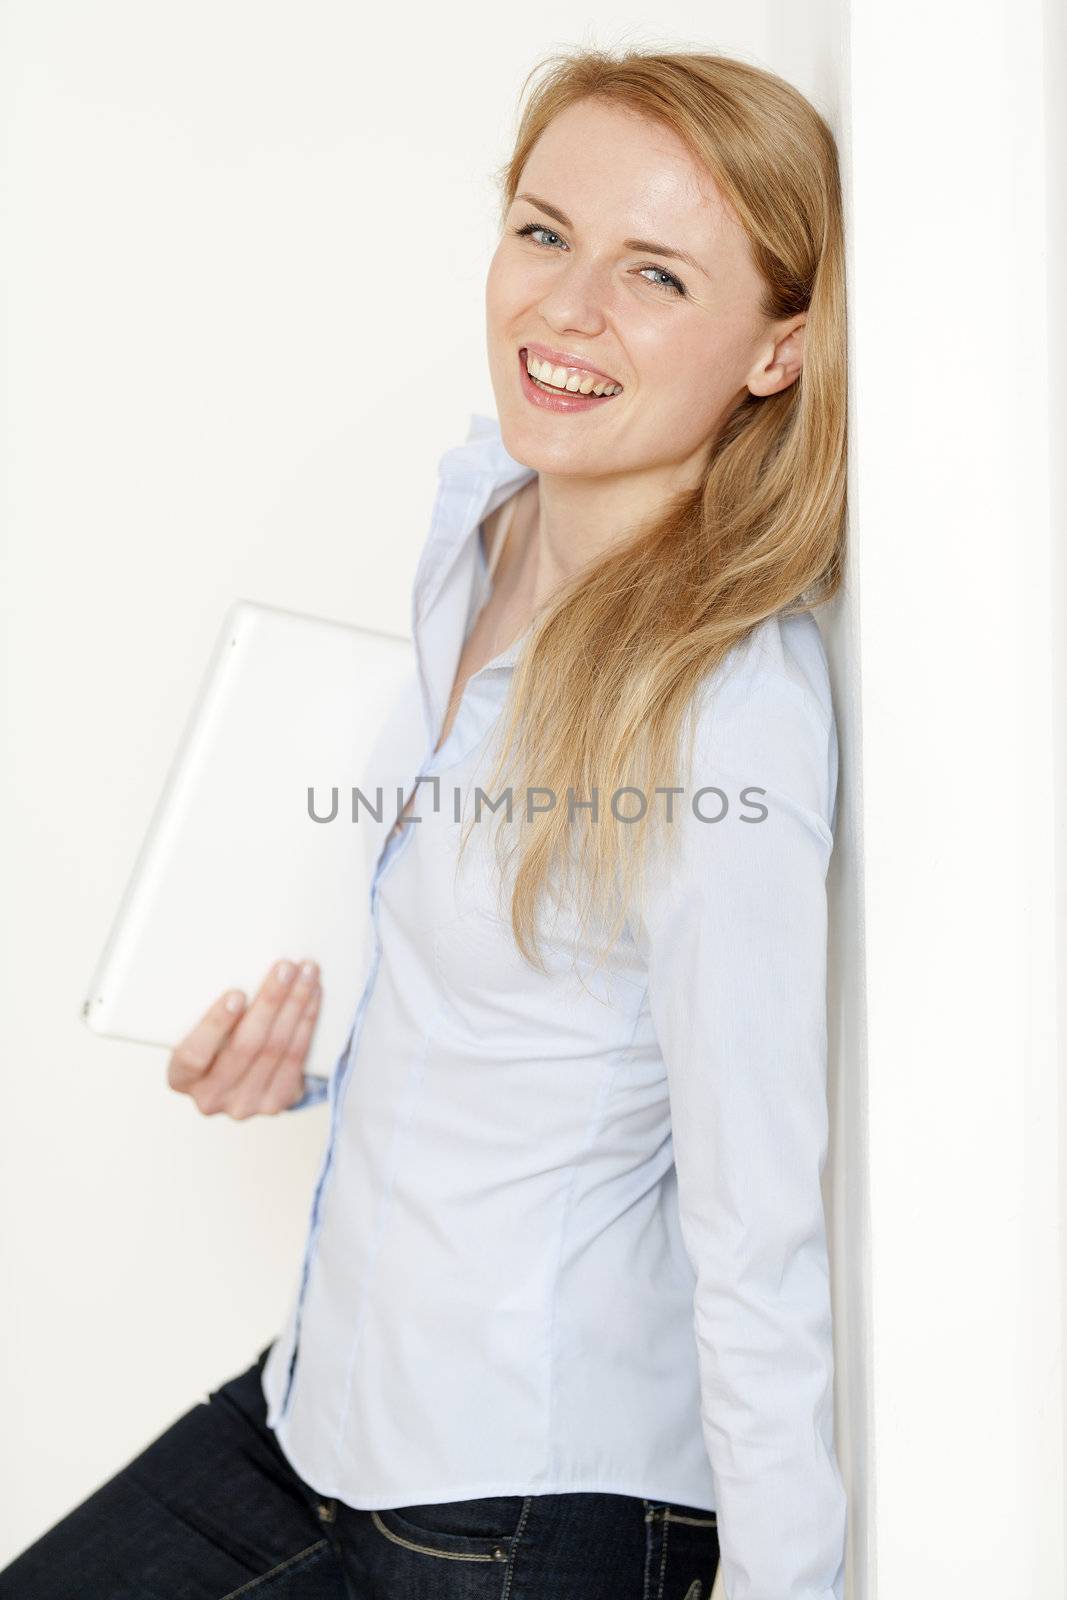 Young woman leaning against a white wall holding a white laptop computer